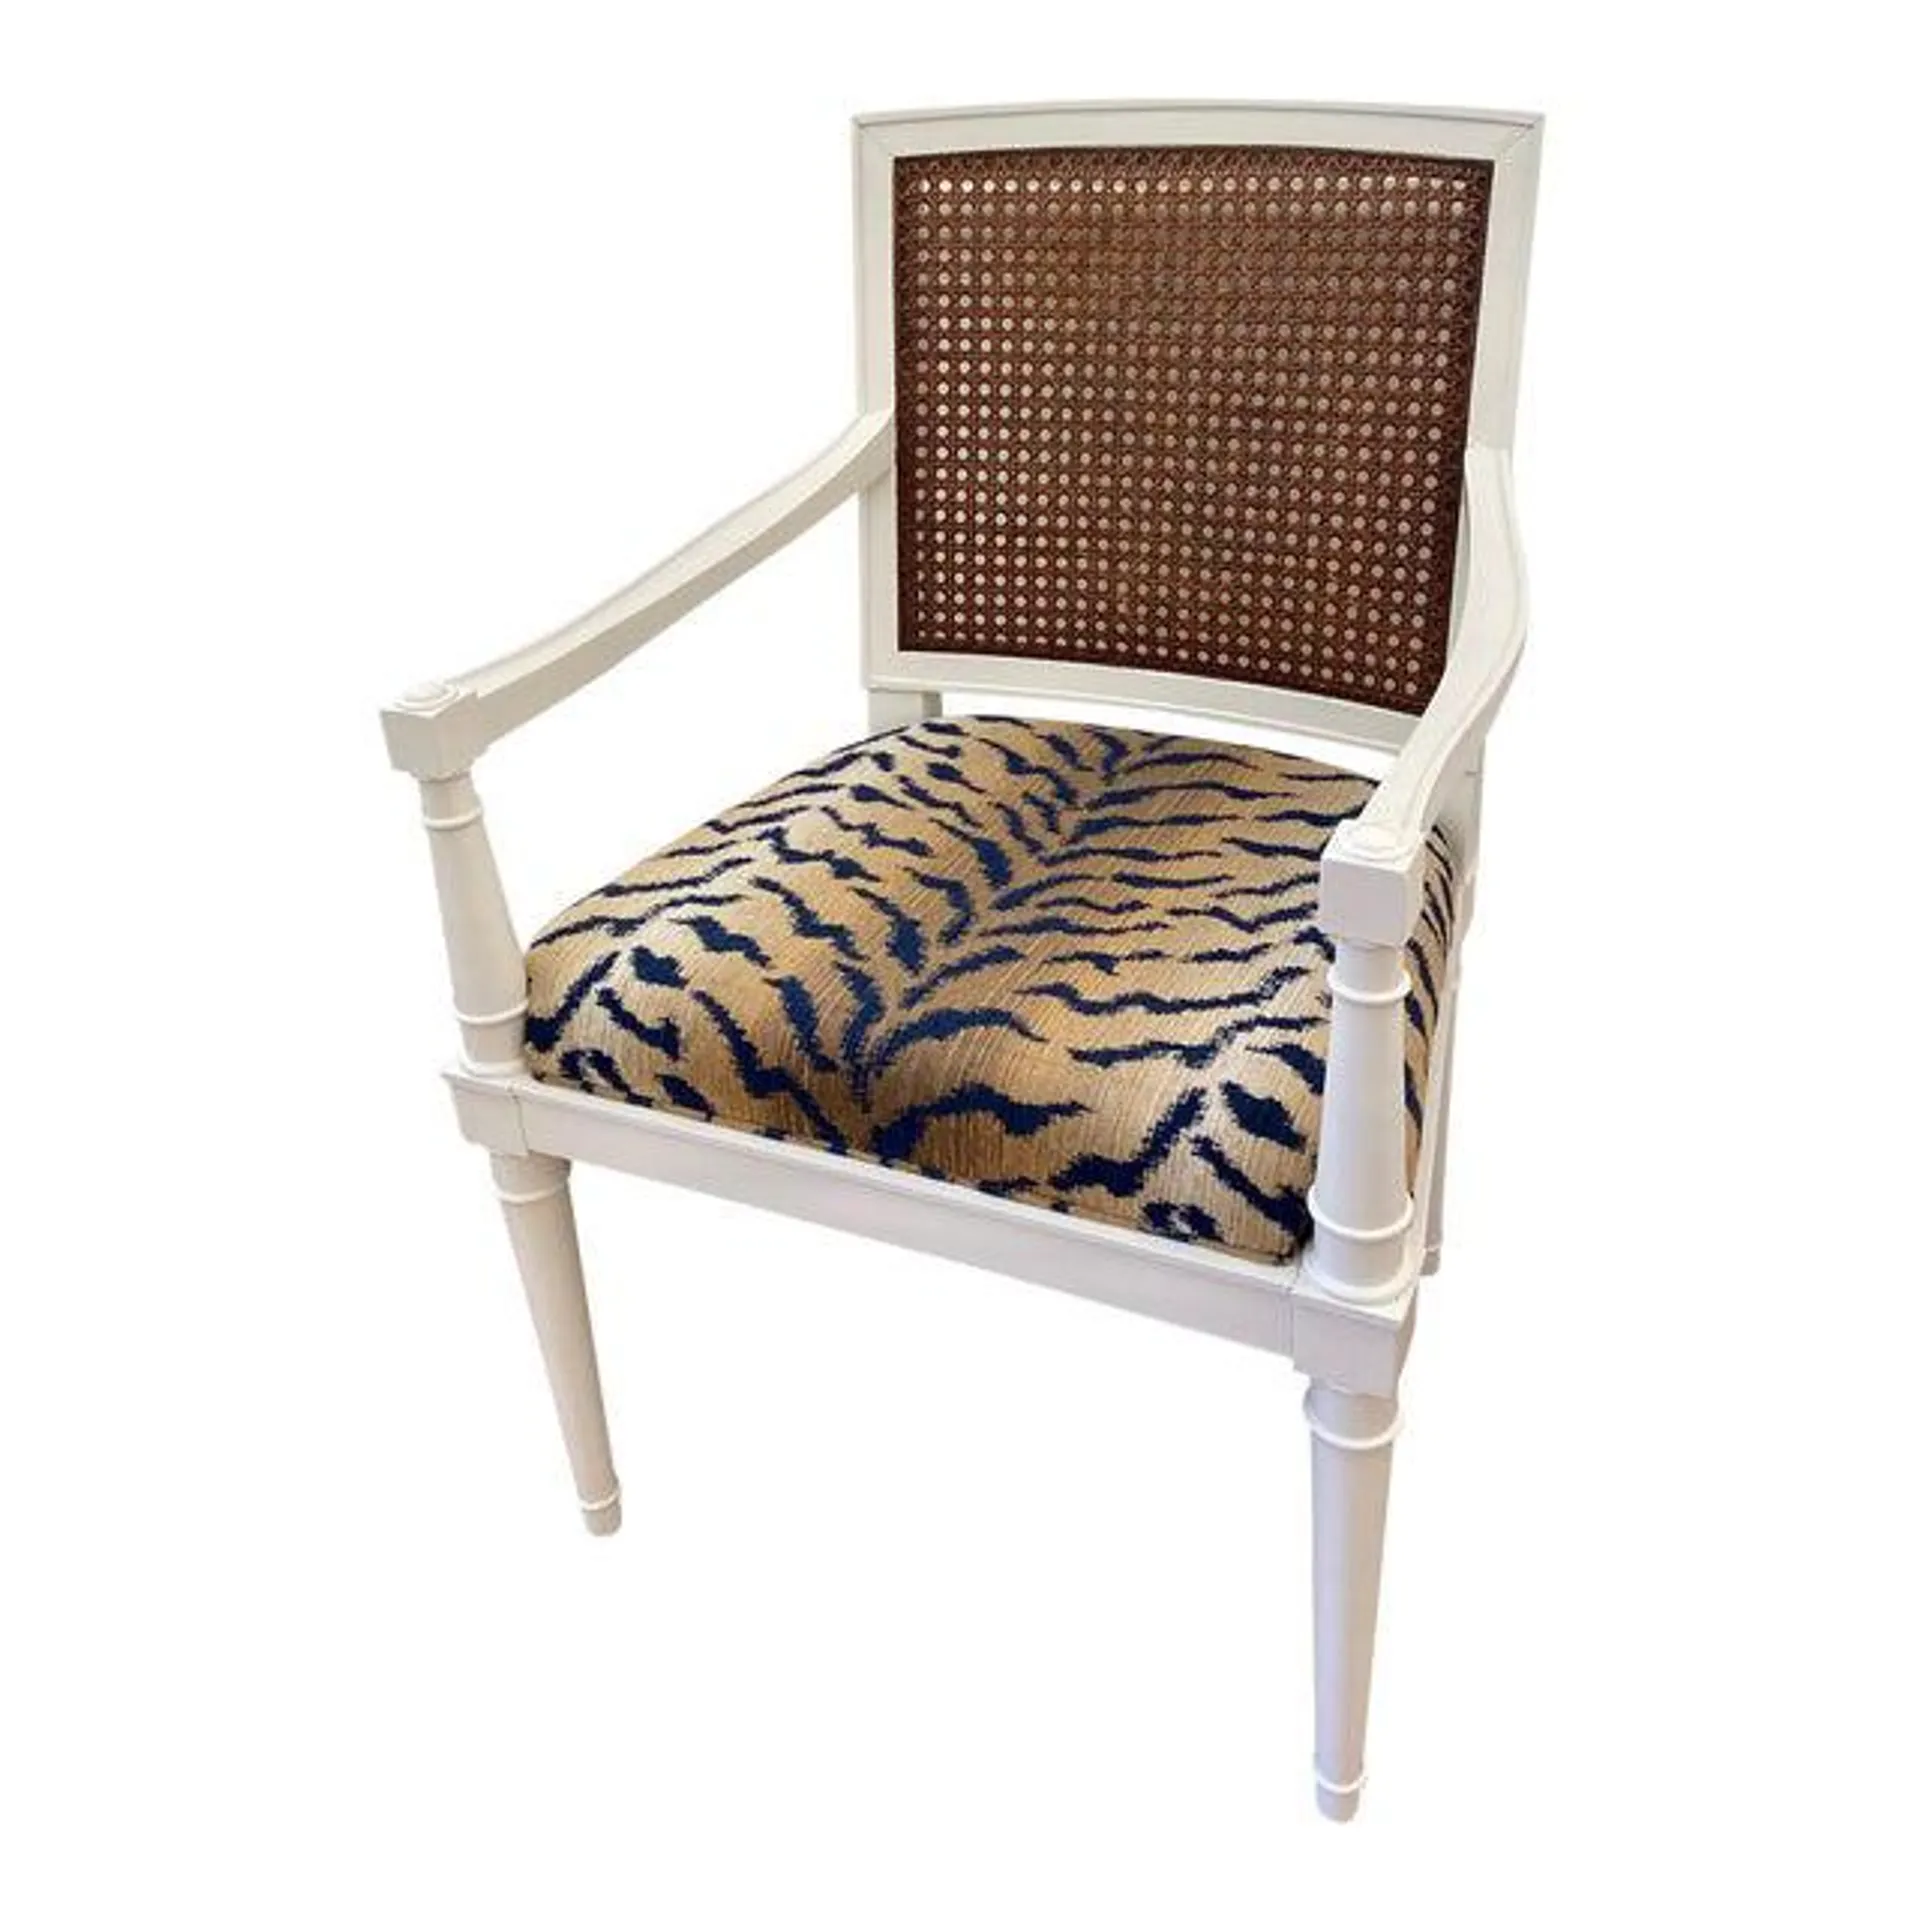 1960s Tomlinson Animal Print and Cane Accent Chair